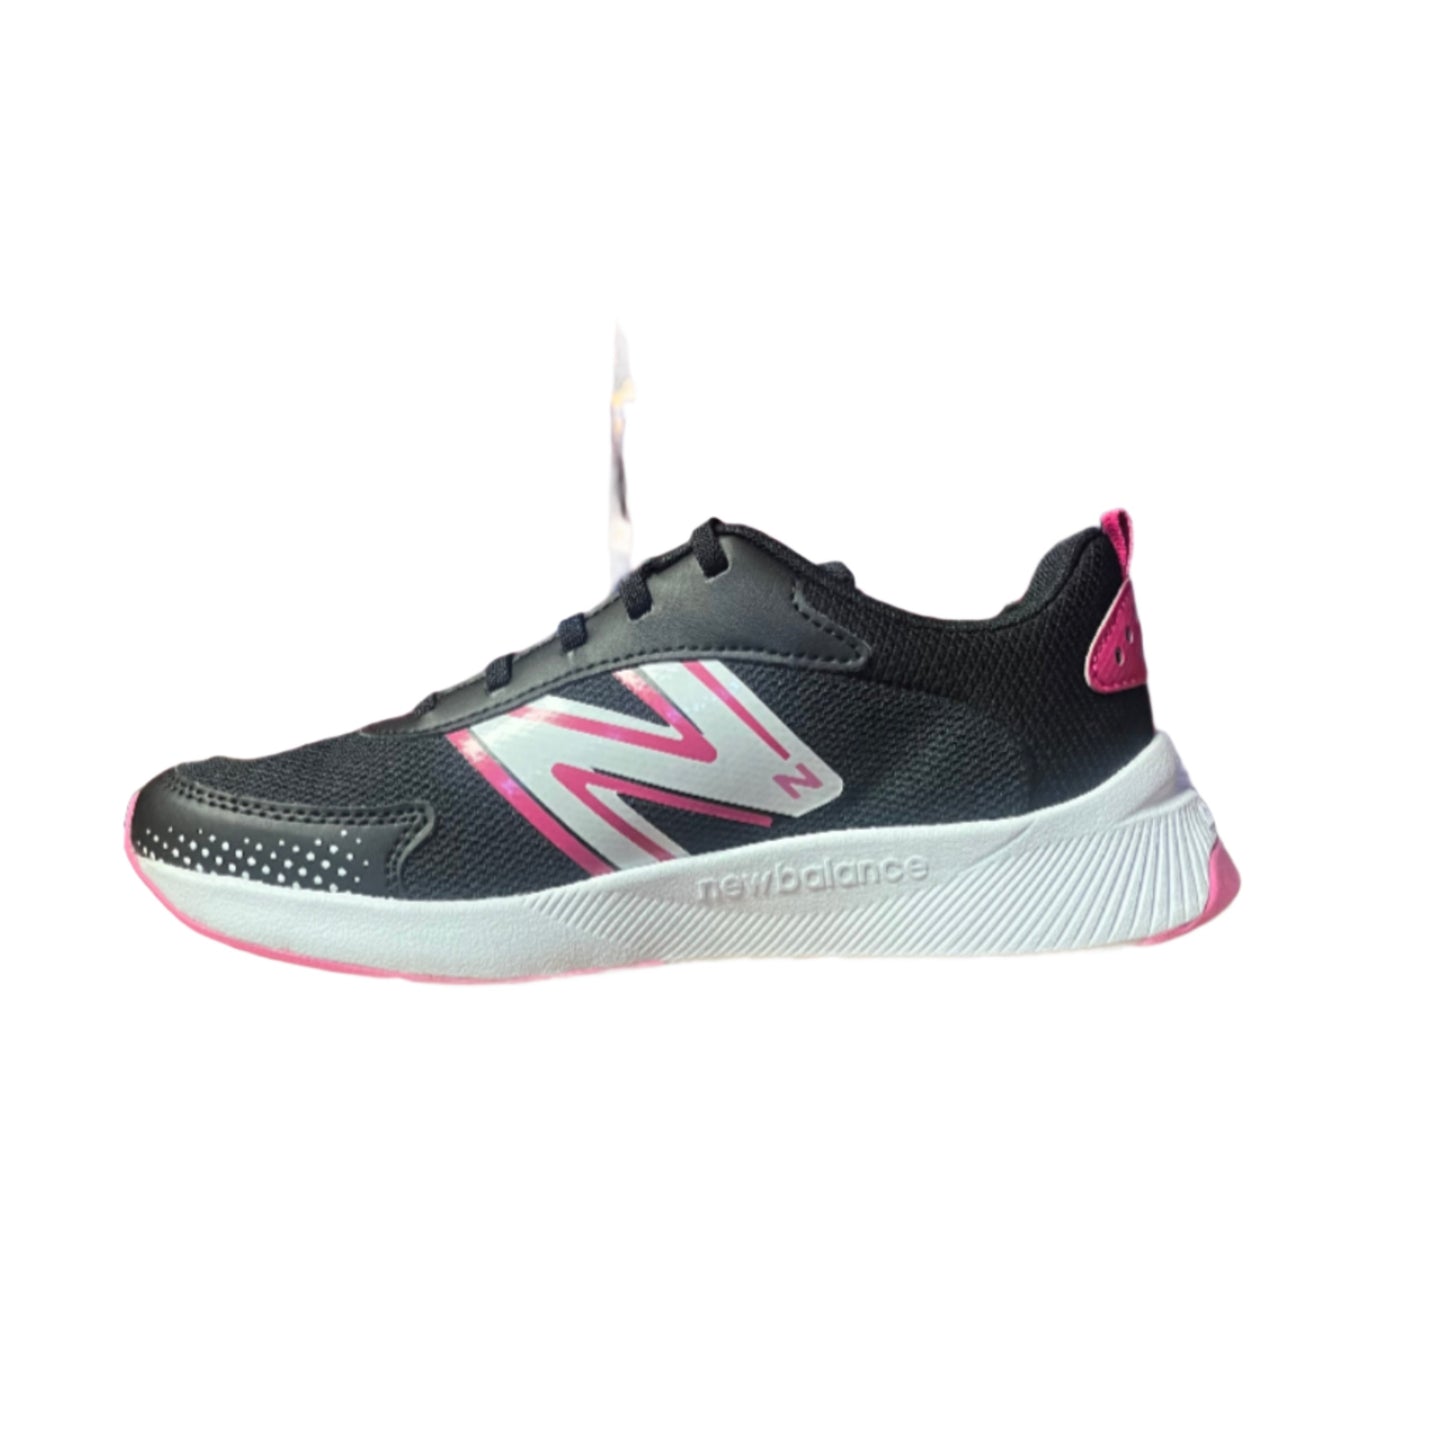 Kid's Dynasoft 545 Bungee Lace with Top Strap Black/Carnival Pink (10.5c-3Y)